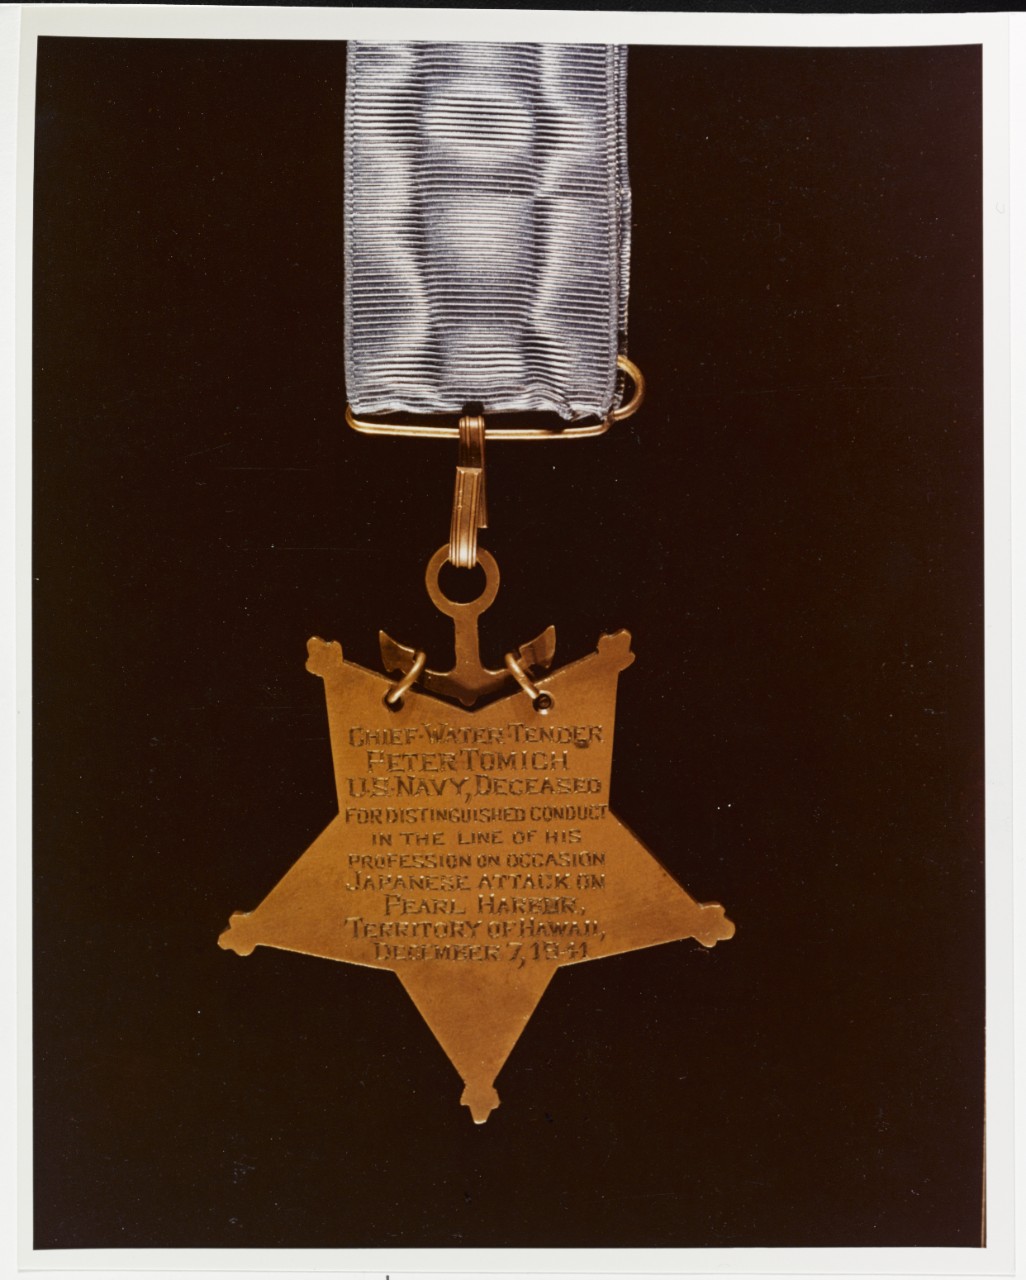 Photo #: NH 95031-KN (Color) U.S. Navy Medal of Honor